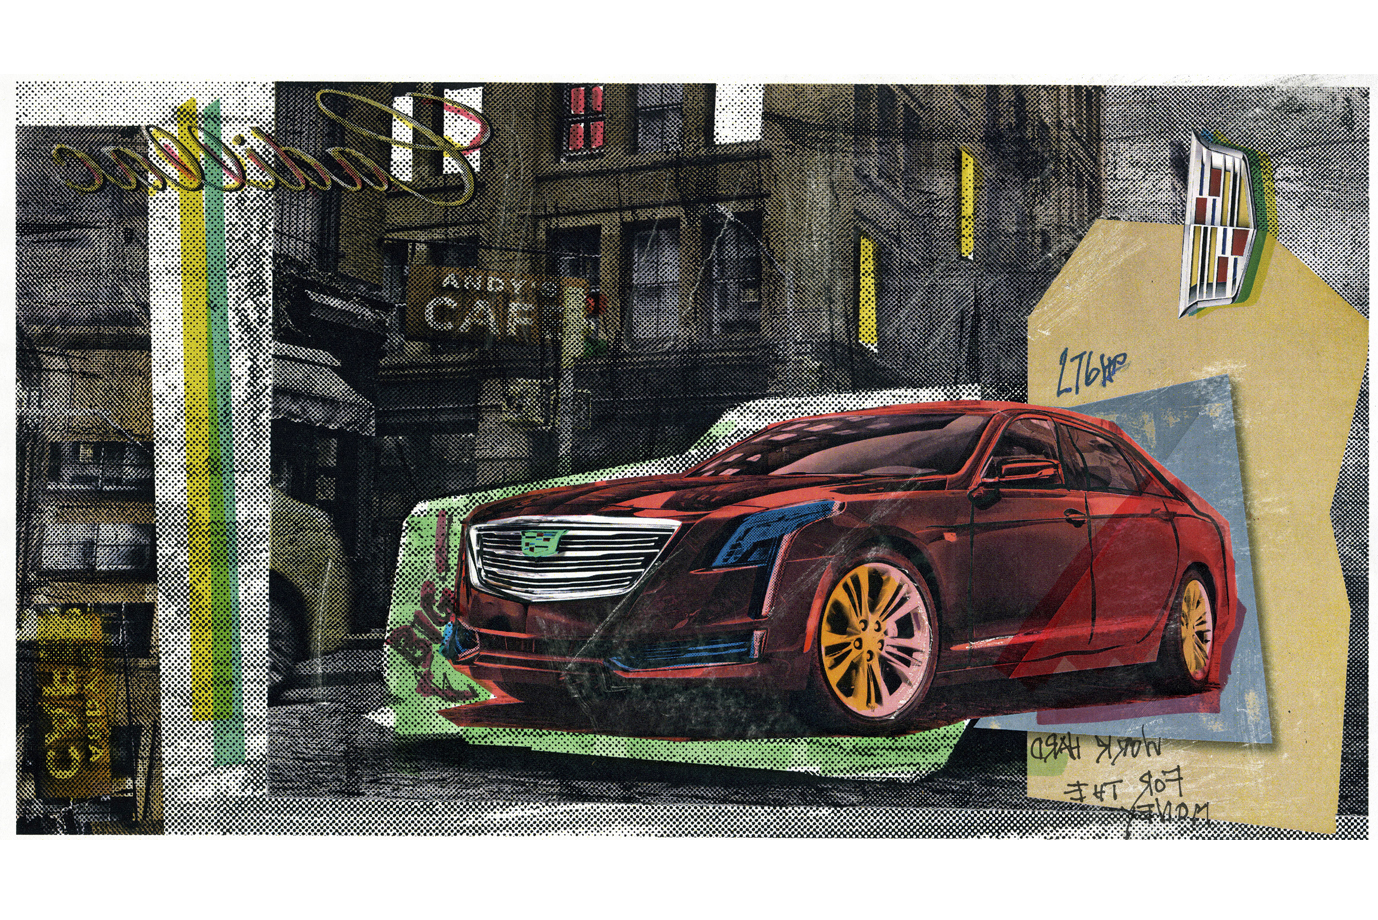 Illustration Cadillac "Letters to Andy Warhol"